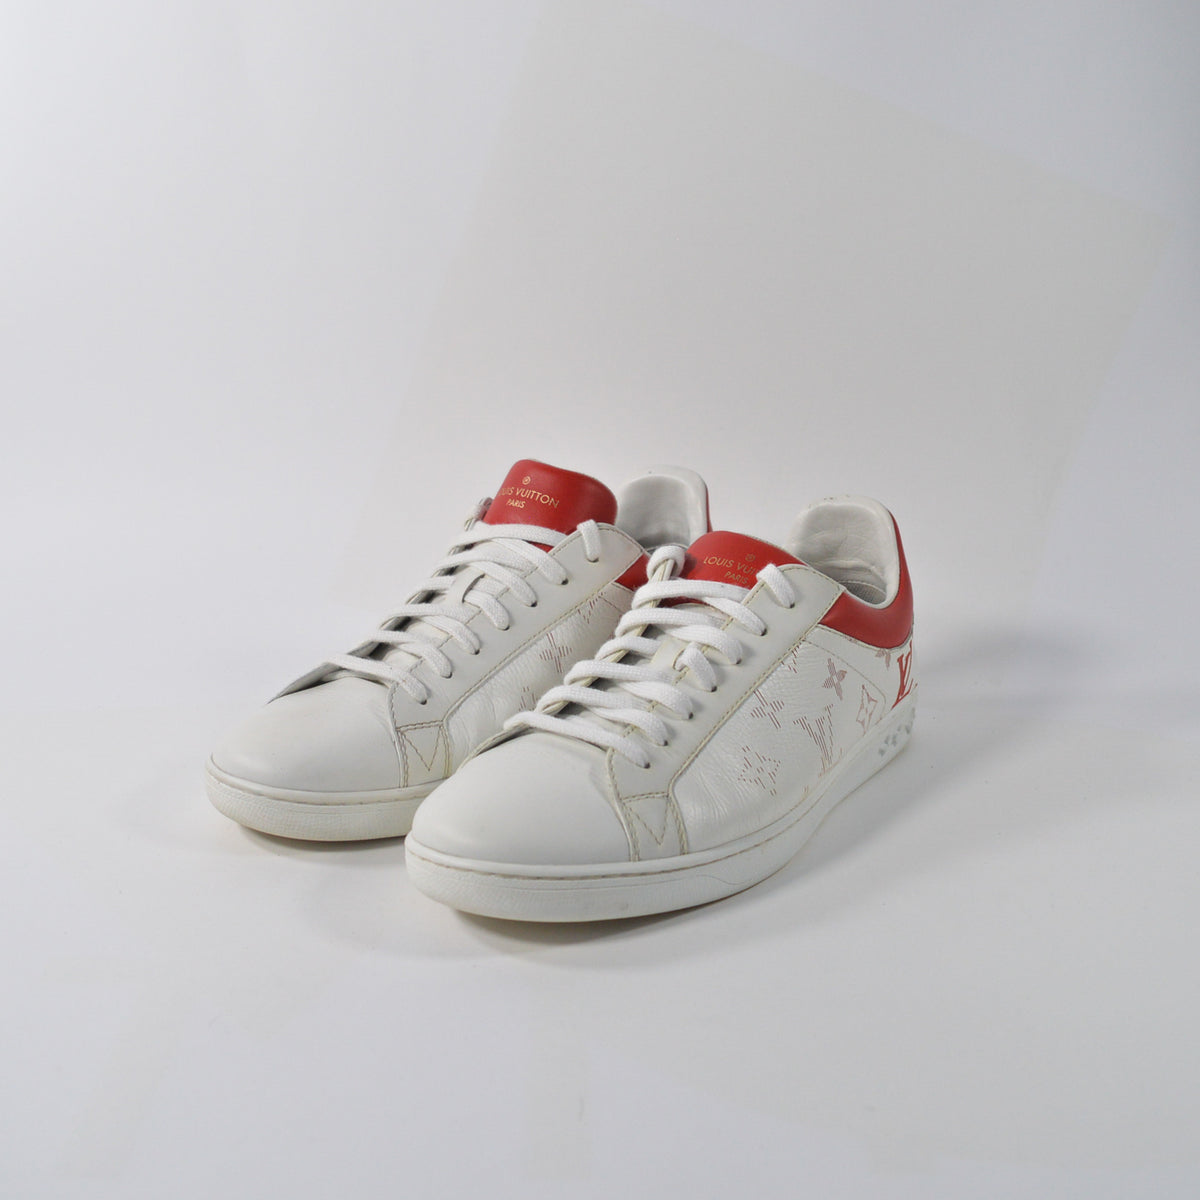 REC0045 LOUIS VUITTON LUXEMBOURG LOW - WHITE/RED - UK 8